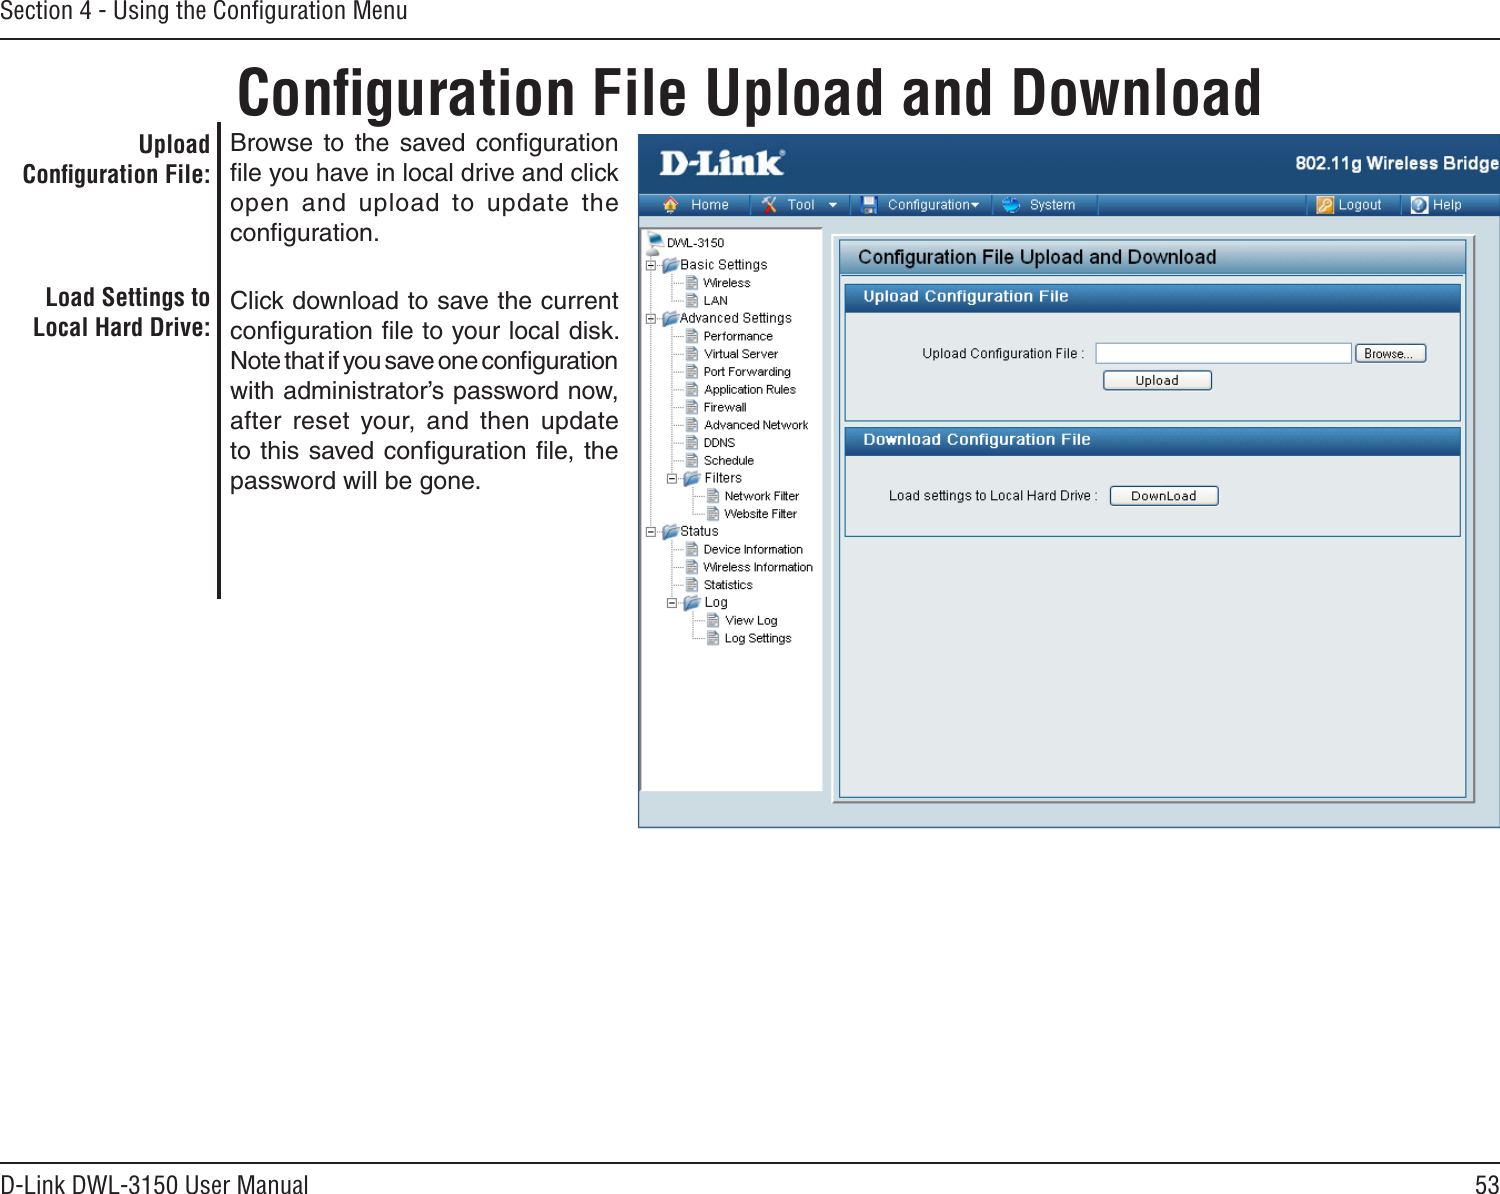 53D-Link DWL-3150 User ManualSection 4 - Using the Conﬁguration MenuConﬁguration File Upload and DownloadBrowse  to  the  saved  conﬁguration ﬁle you have in local drive and click open  and  upload  to  update  the conﬁguration.Click download to save the current conﬁguration ﬁle to your local disk. Note that if you save one conﬁguration with administrator’s password now, after  reset  your,  and  then  update to this saved conﬁguration ﬁle, the password will be gone.Upload Conﬁguration File:Load Settings to Local Hard Drive: